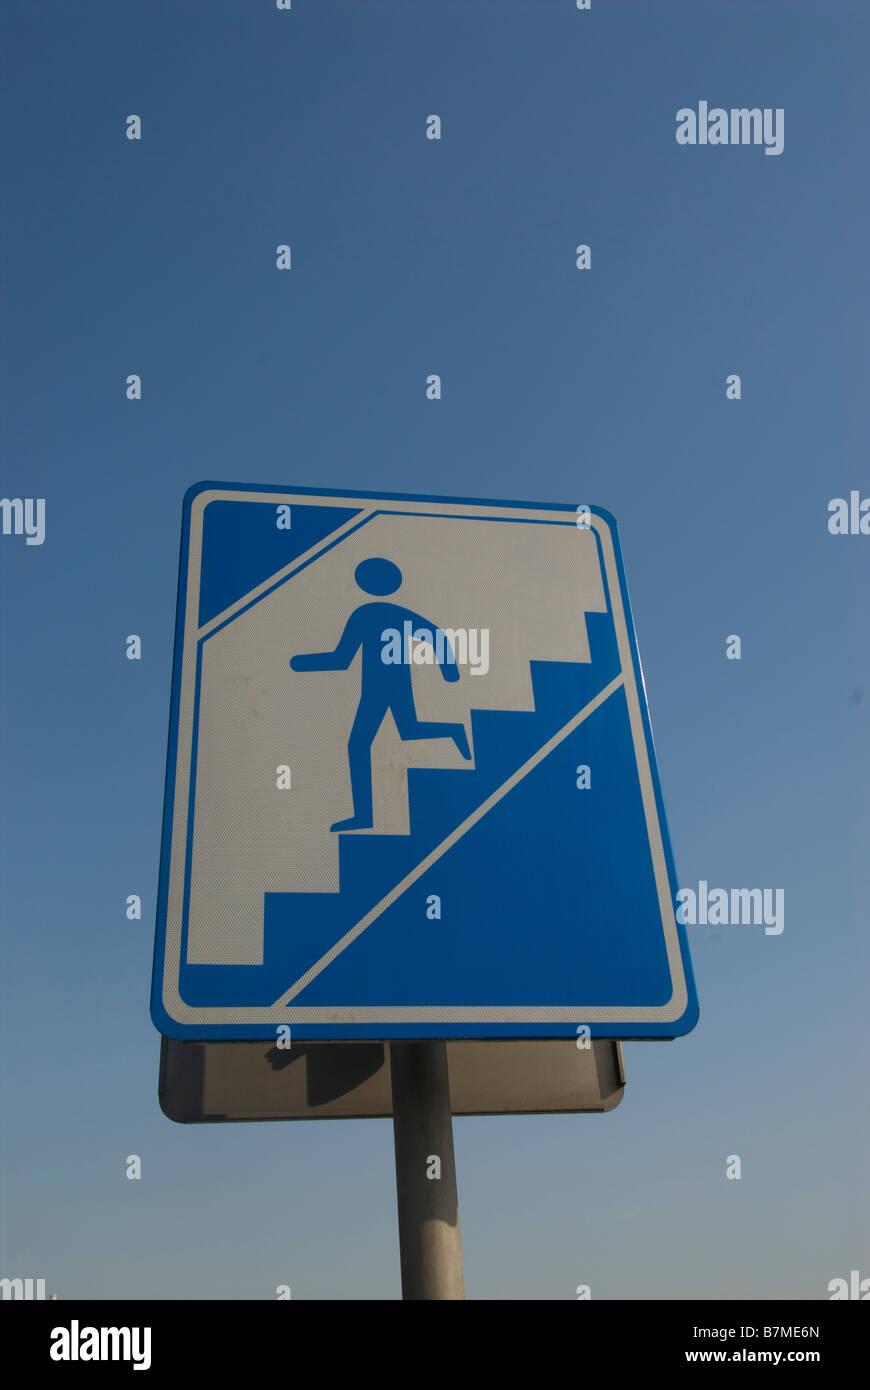 Go downstairs sign Stock Photo